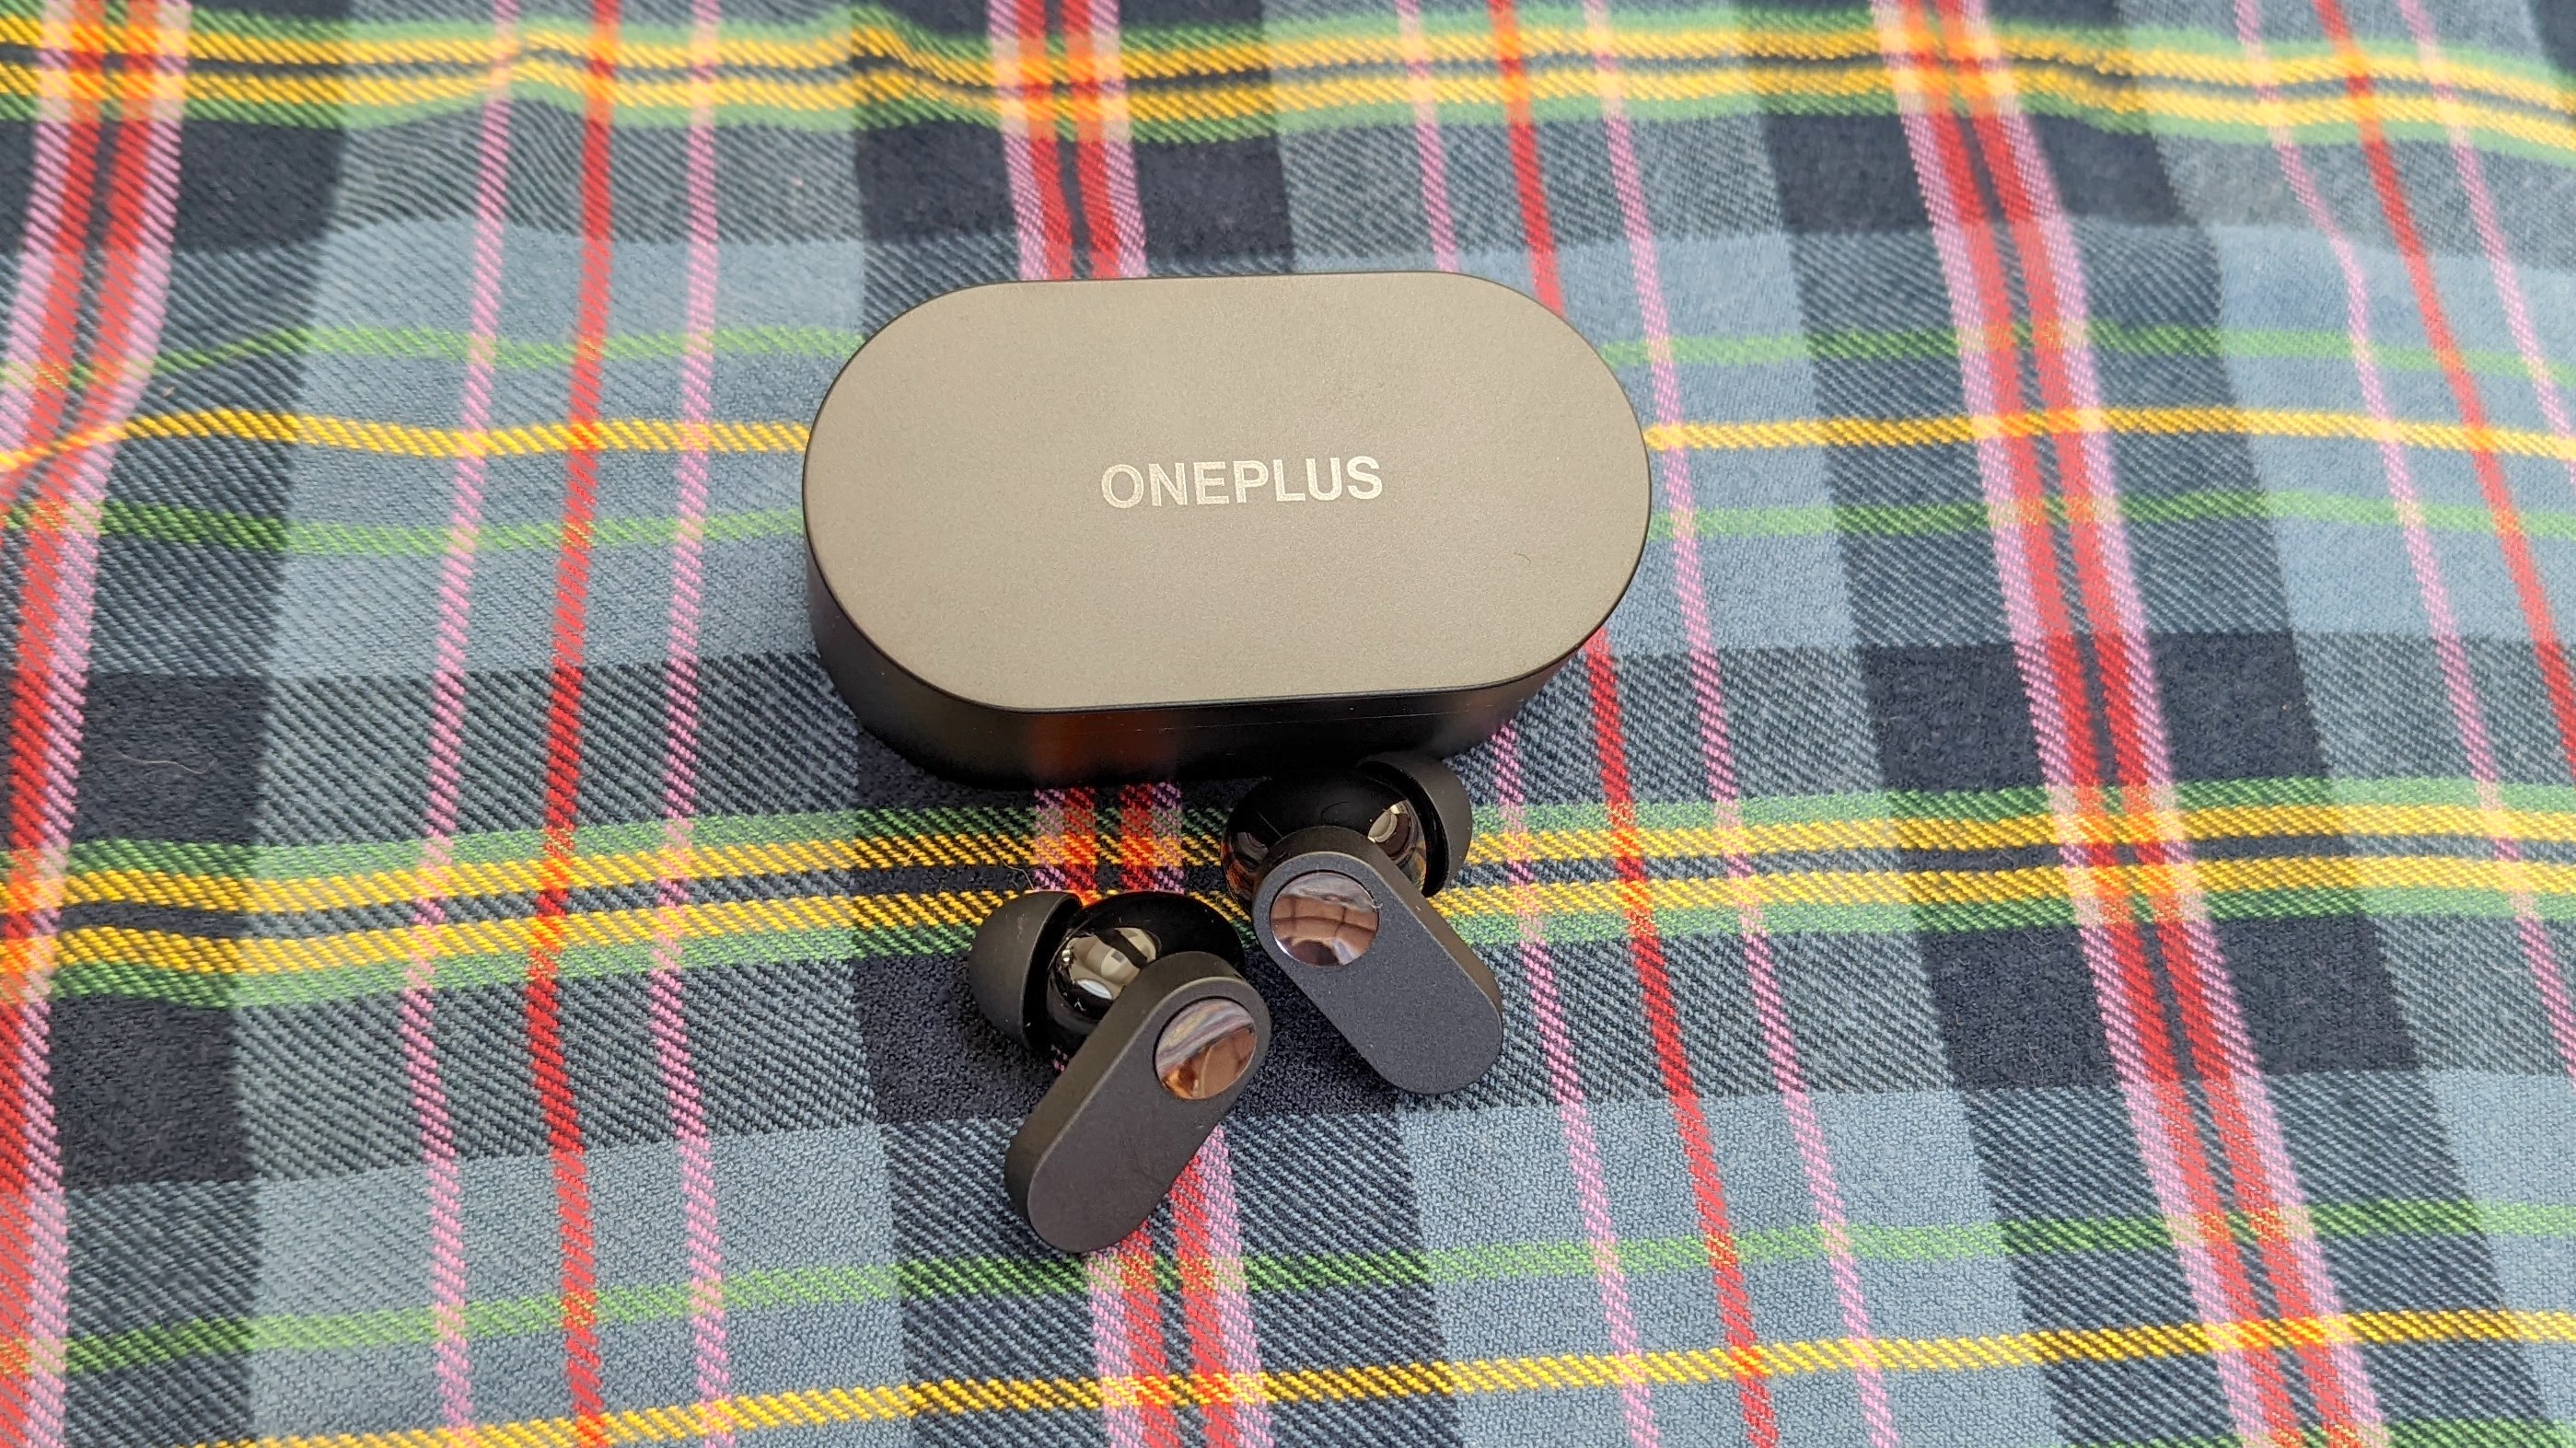 The OnePlus Nord Buds resting on plaid fabric